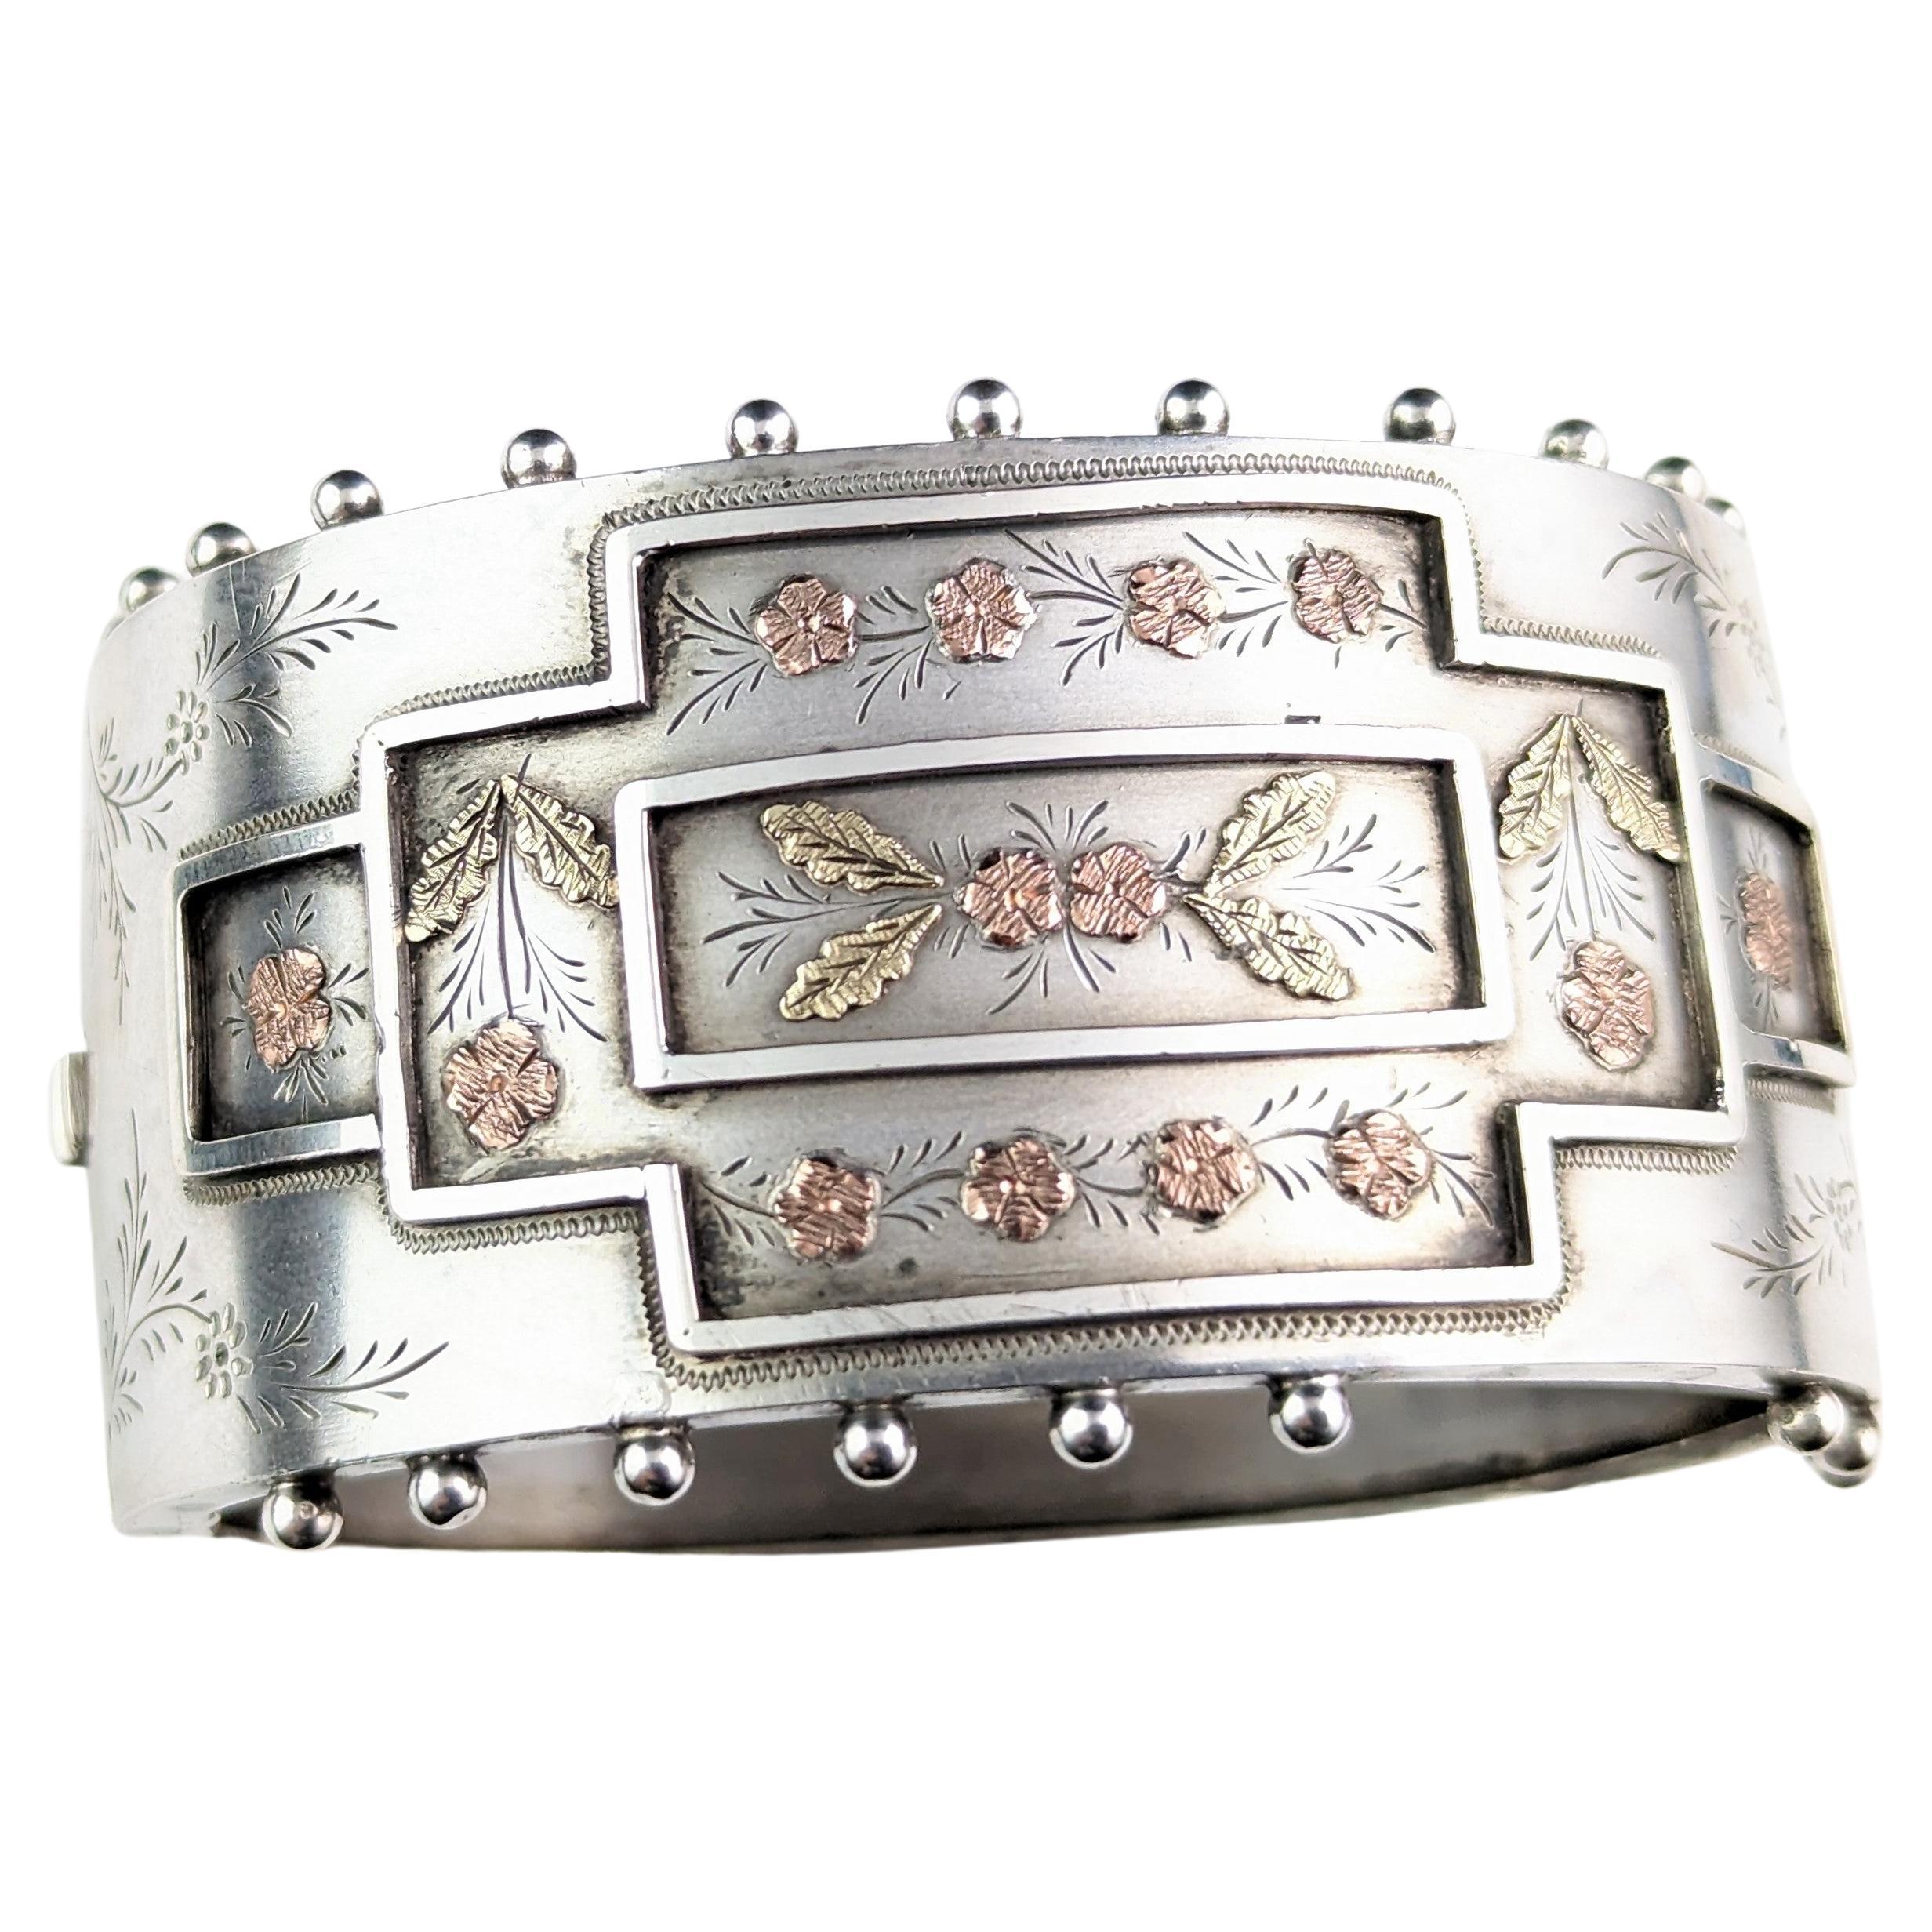 Antique Victorian aesthetic silver cuff bangle, 9k gold floral design